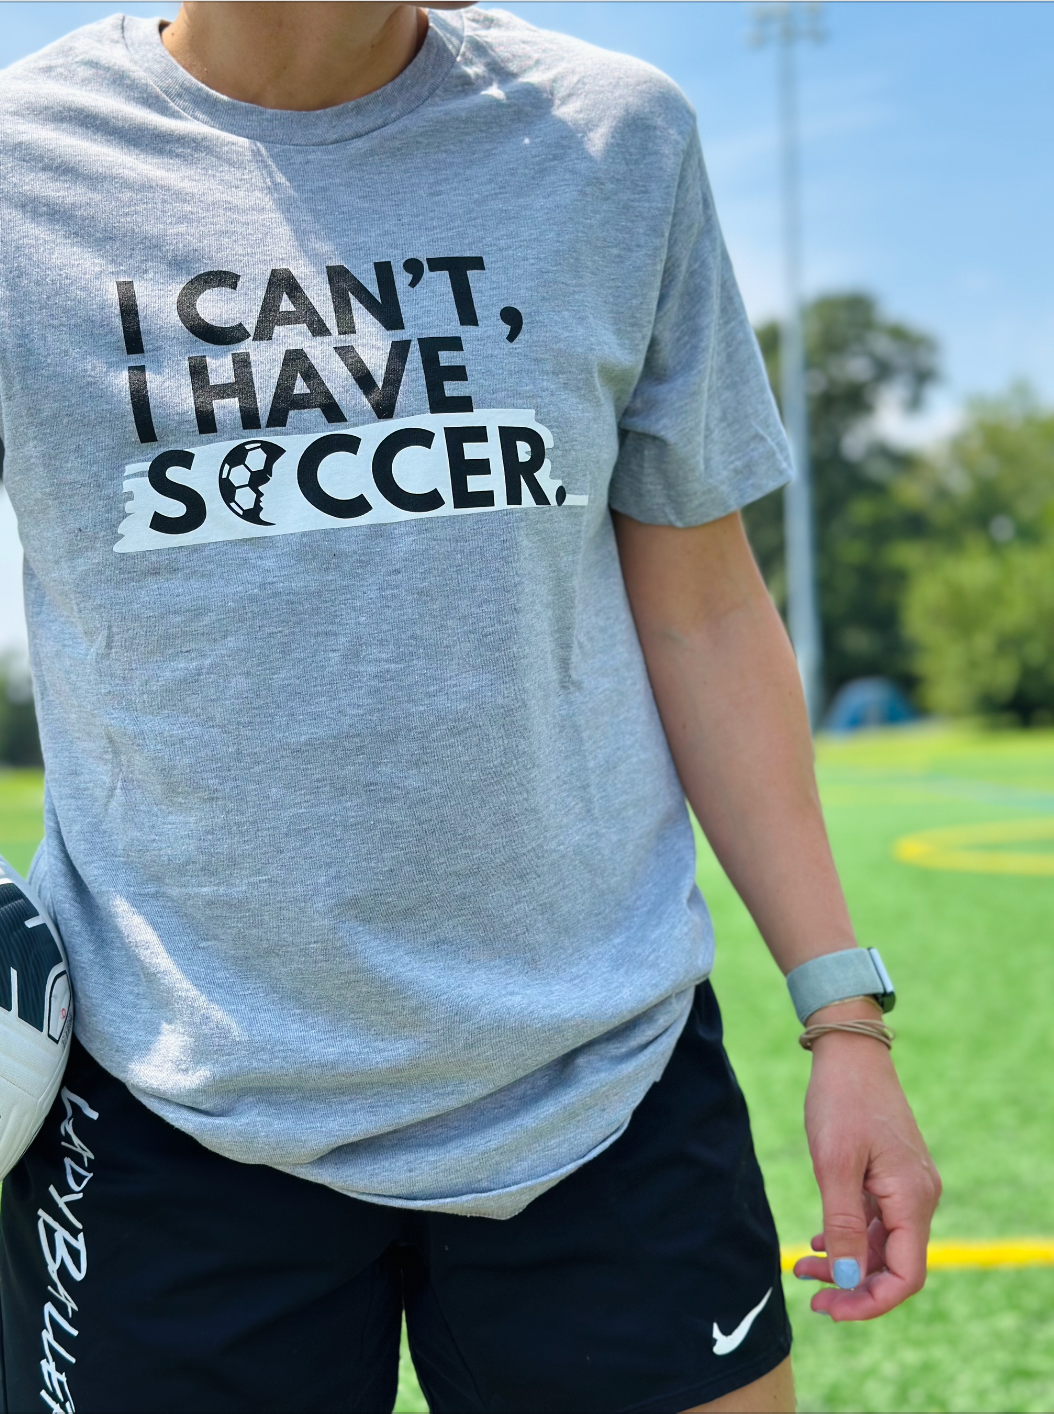 I can't I have soccer t-shirt grey soccergrlprobs soccer girl problems